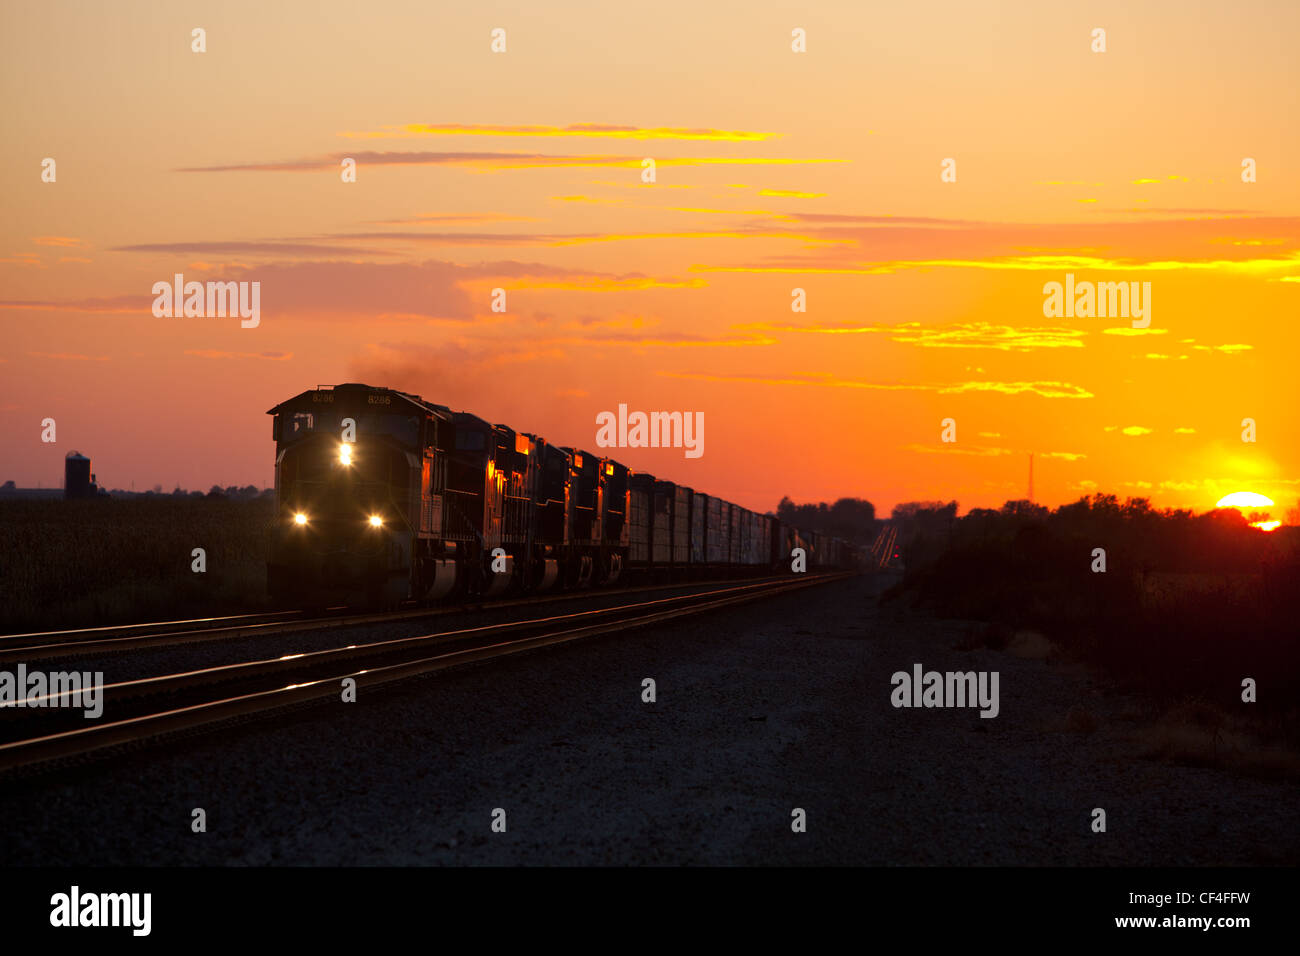 Freight train rolls out of a colorful sunset. Stock Photo